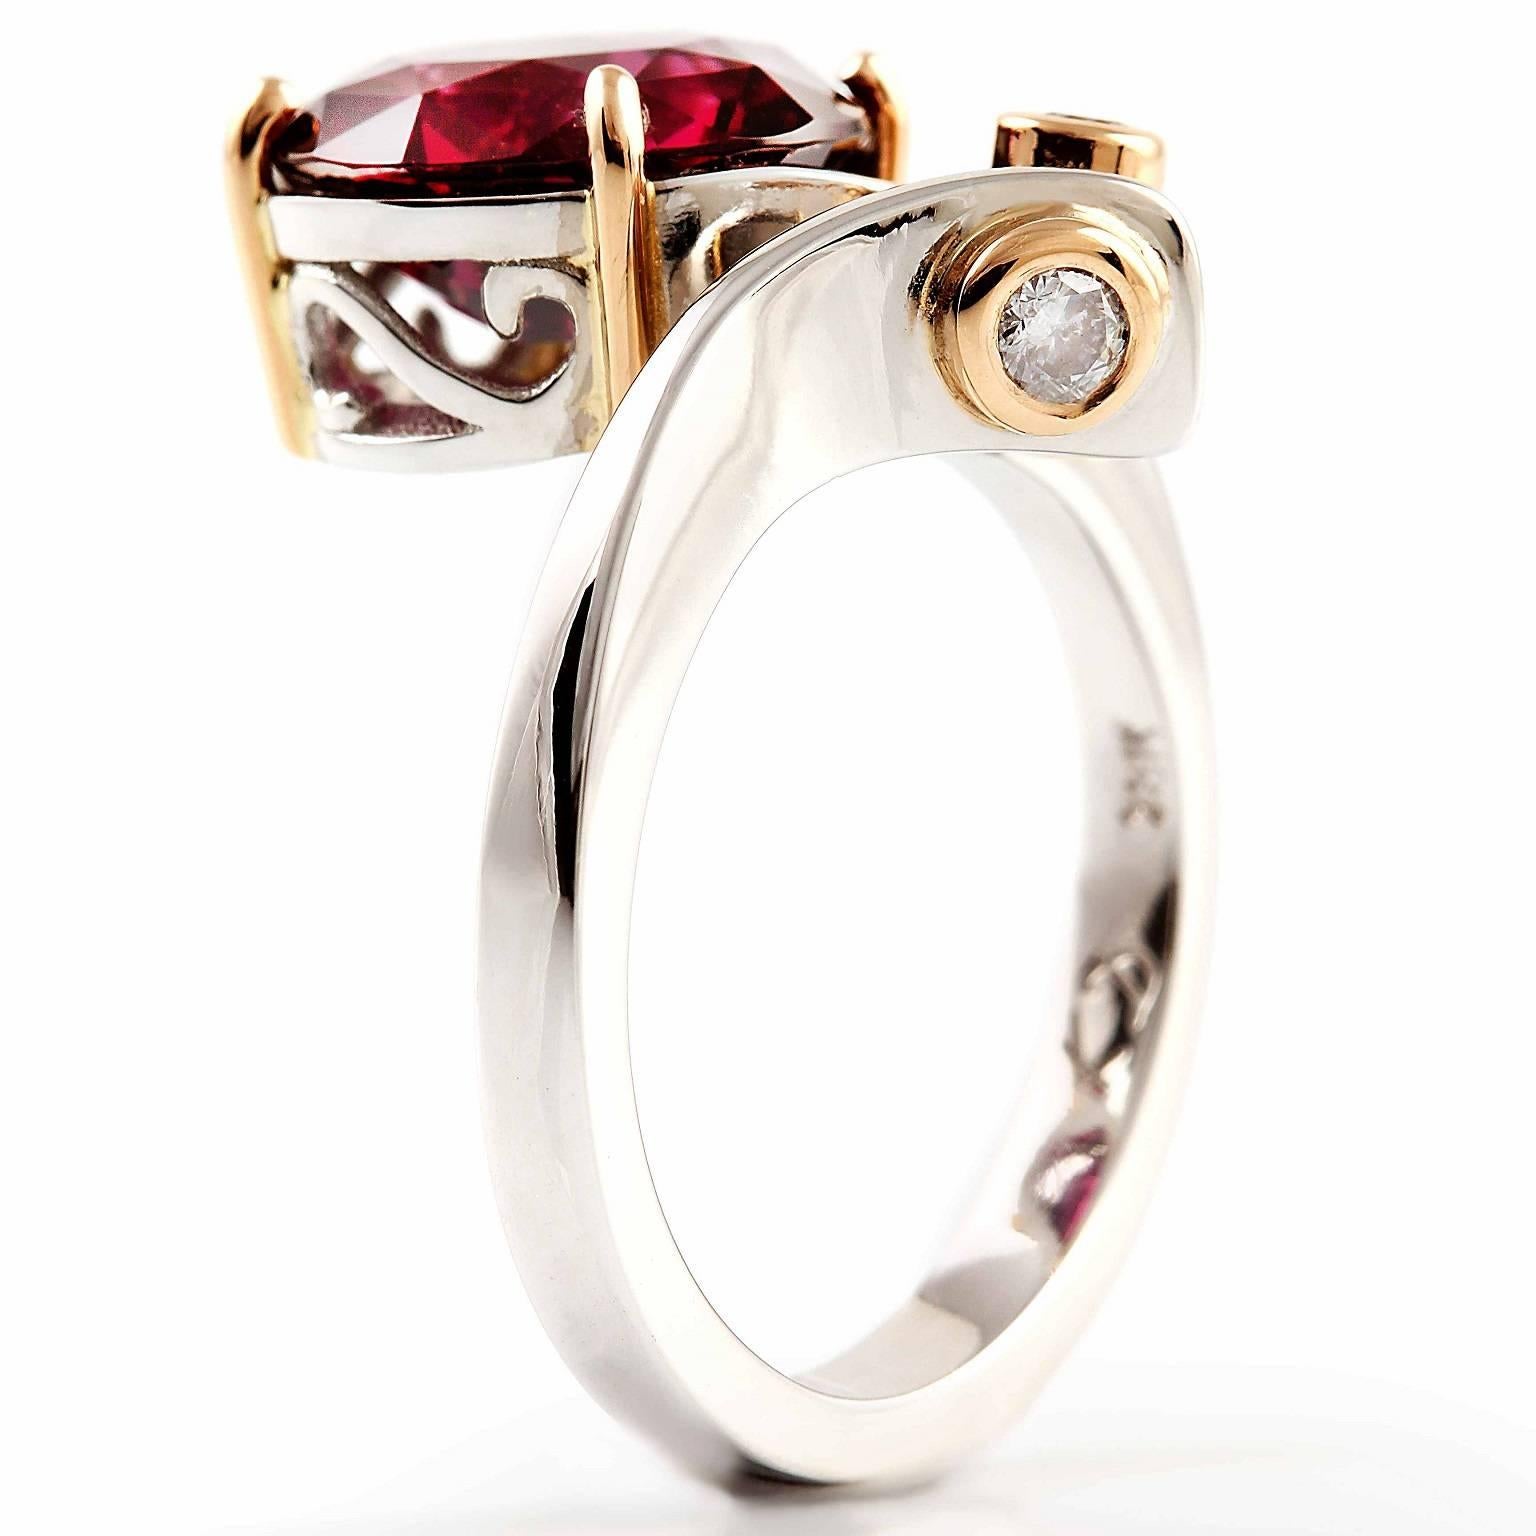 Rhodolite Ring

The stunning oval cut rhodolite garnet is set in four rose gold claws in a fancy scroll design white gold setting is diagonally complimented with two petite diamonds in rose gold chenier settings. The sweeping shoulders are curved